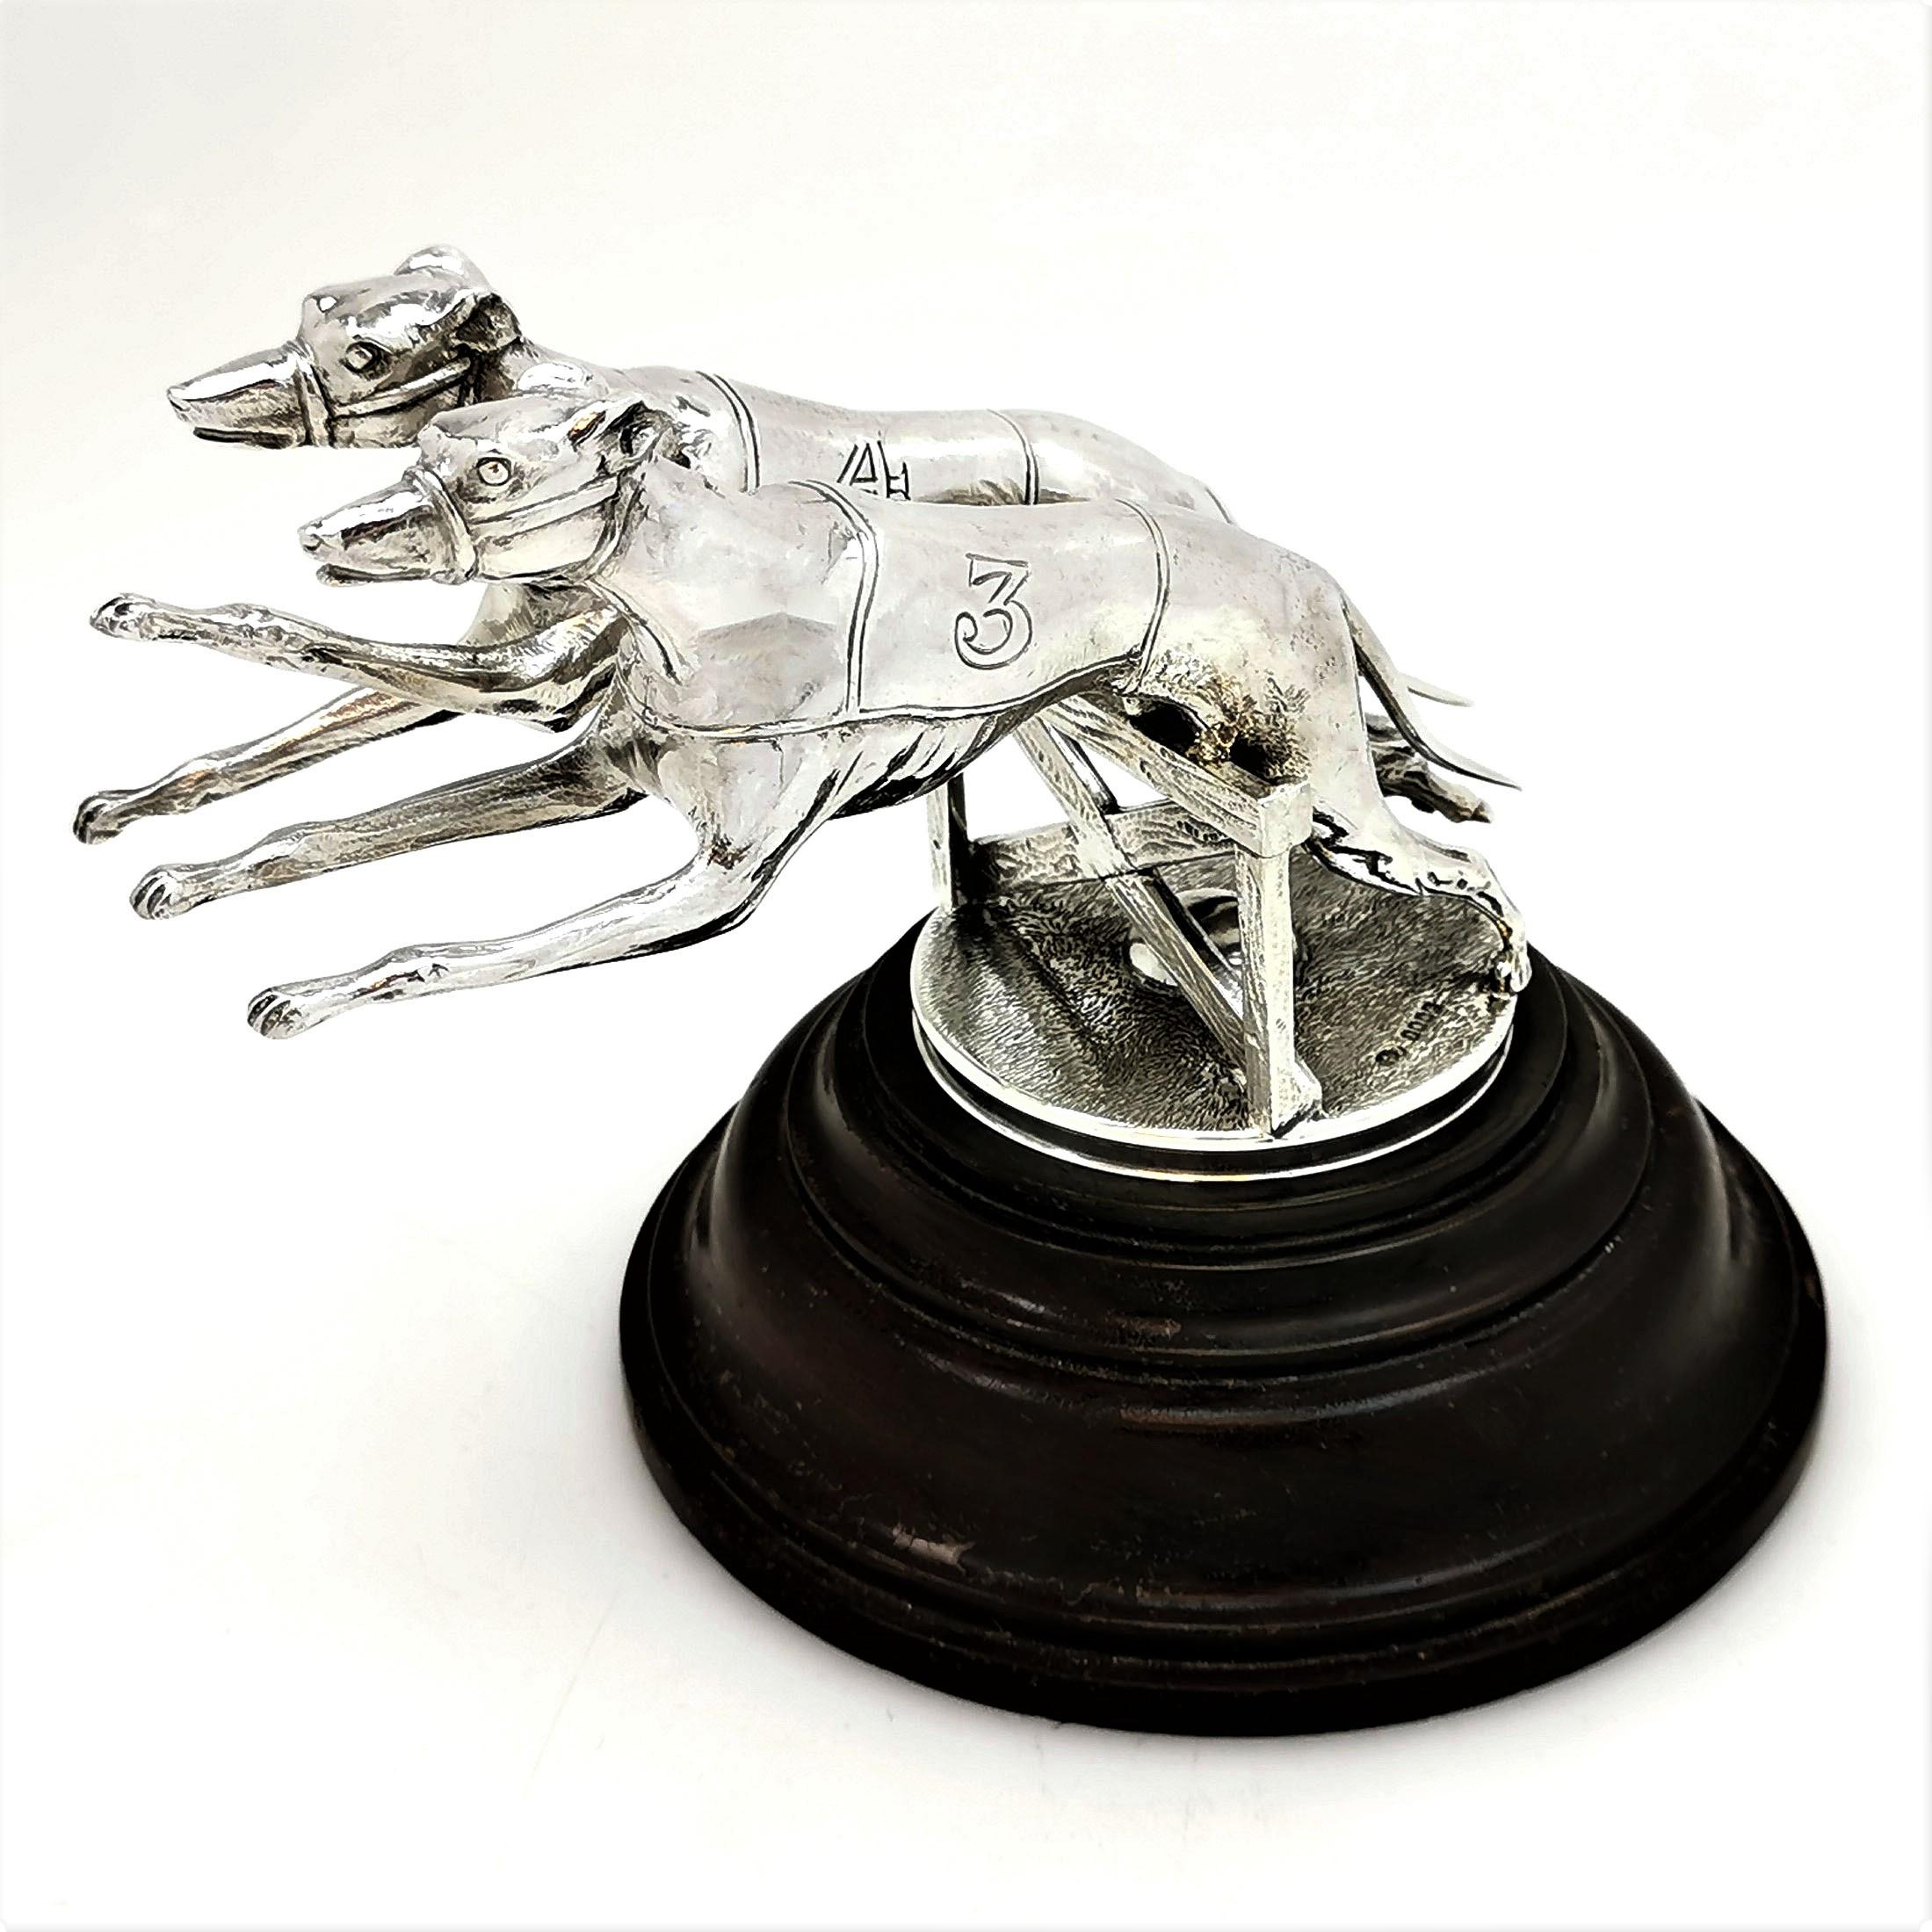 20th Century Pair of Greyhound Dogs on Plinth Sterling Silver Model Statue Figures, 1927